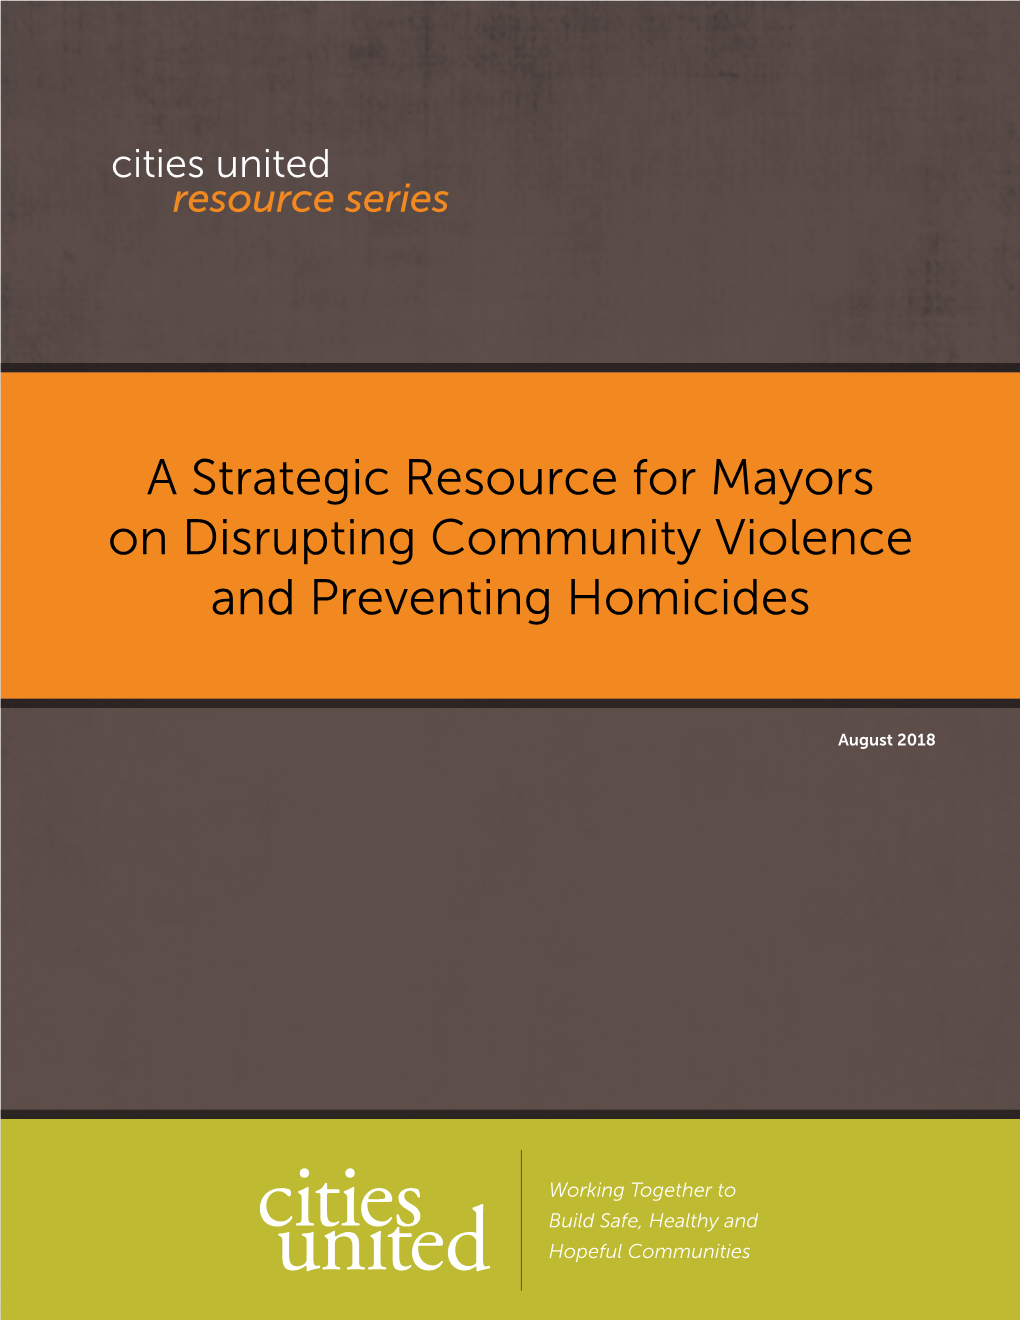 A Strategic Resource for Mayors on Disrupting Community Violence and Preventing Homicides